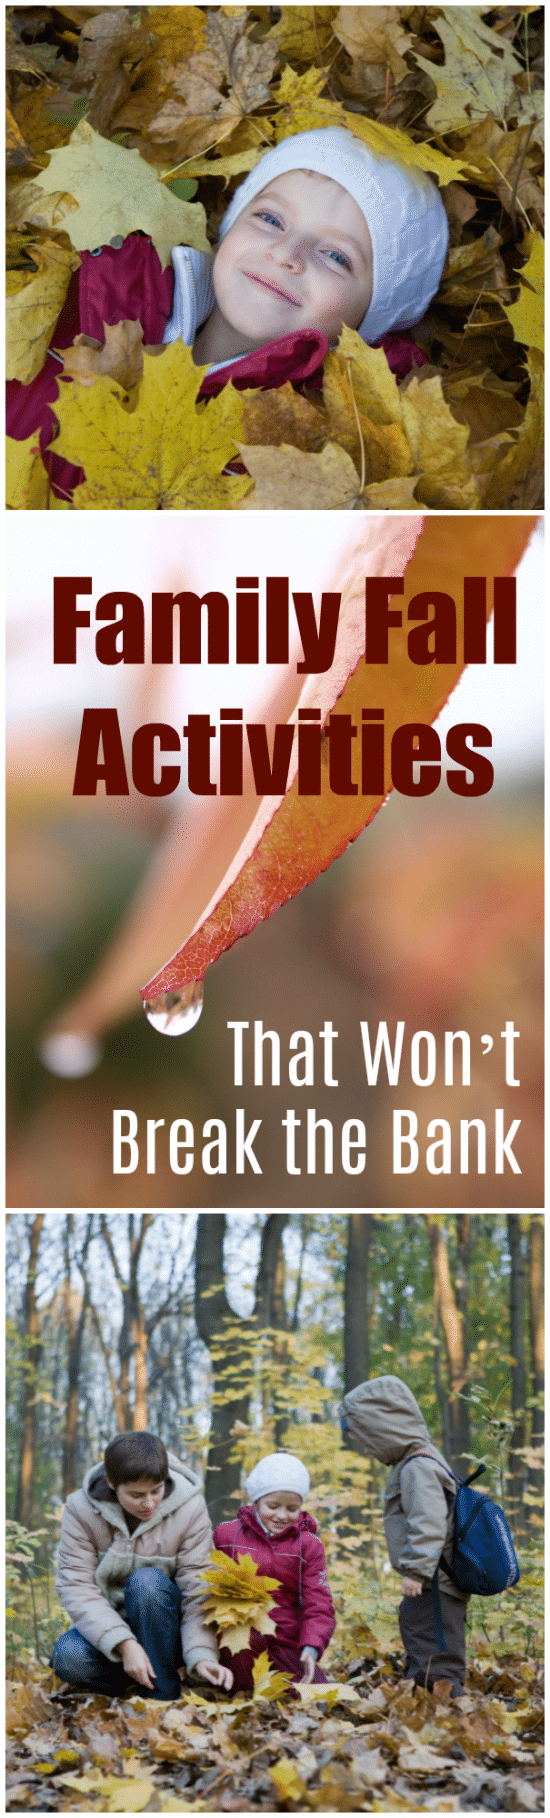 Round up the kids and enjoy autumn with these ideas for Family Fall Activities that Won’t Break the Bank!